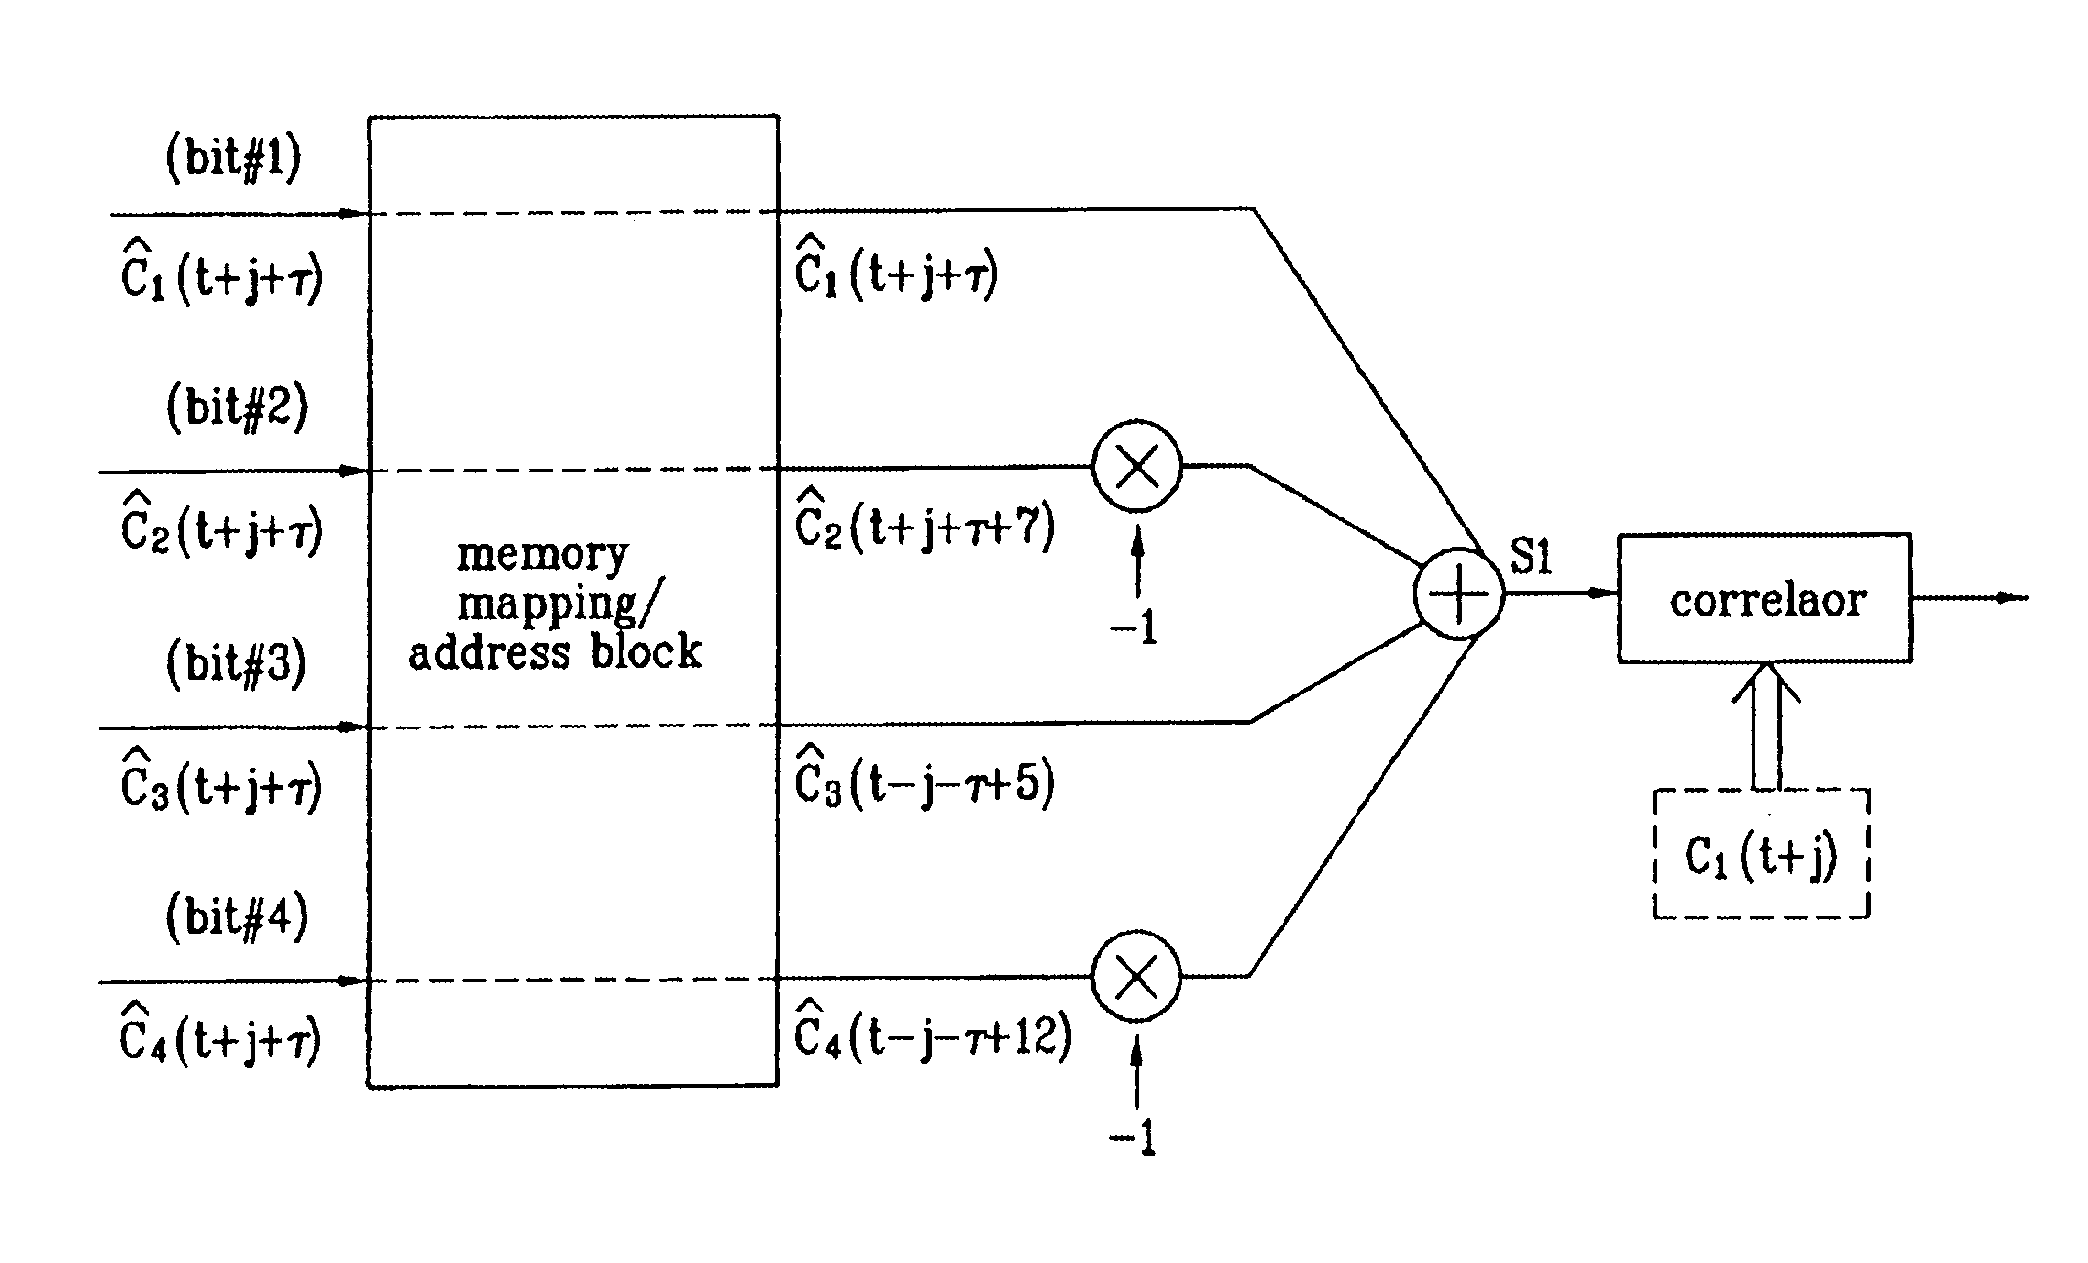 Pilot signals for synchronization and/or channel estimation